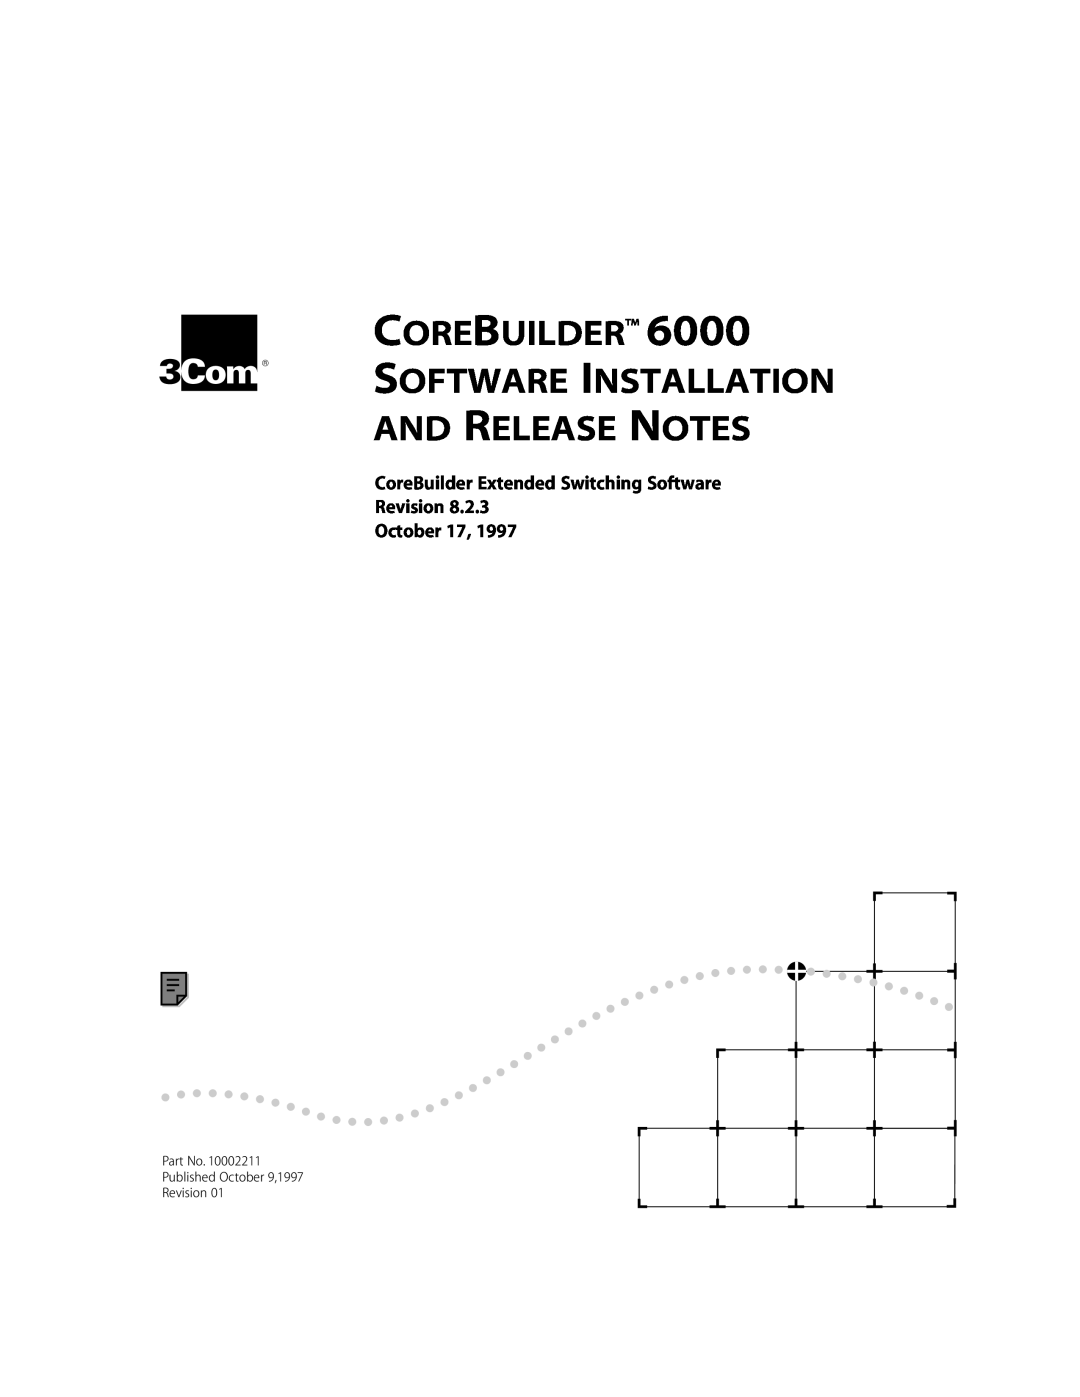 3Com 10002211 manual Software Installation And Release Notes, Corebuilder, Published October 9,1997 Revision 